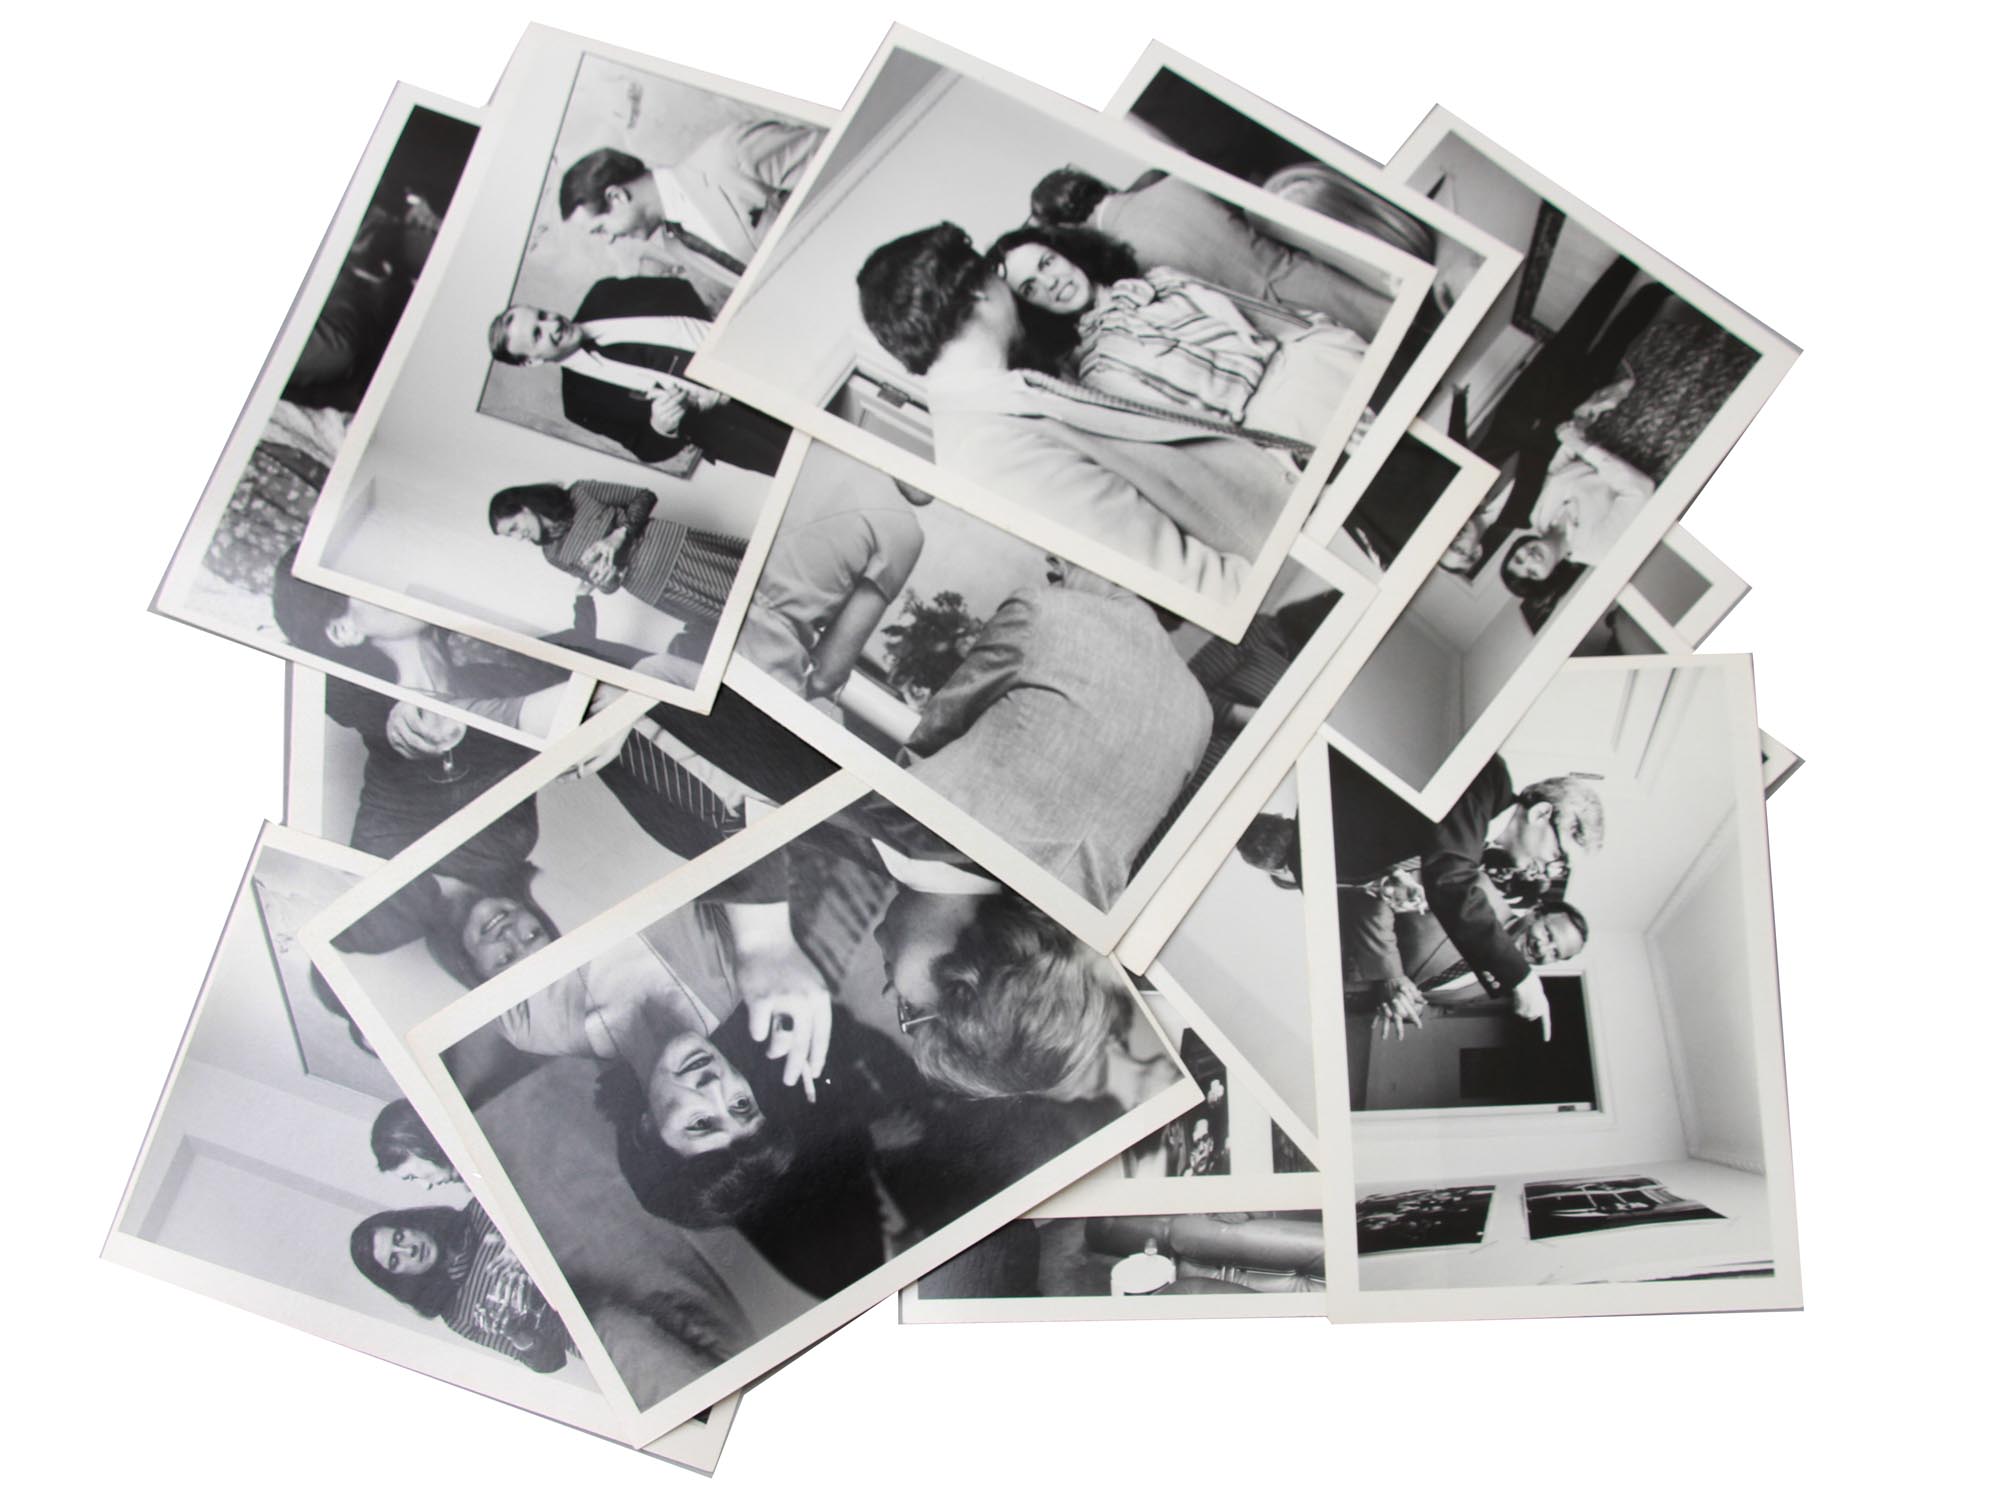 ANALOGUE BLACK AND WHITE PHOTOS BY MARTHA HOLMES PIC-2